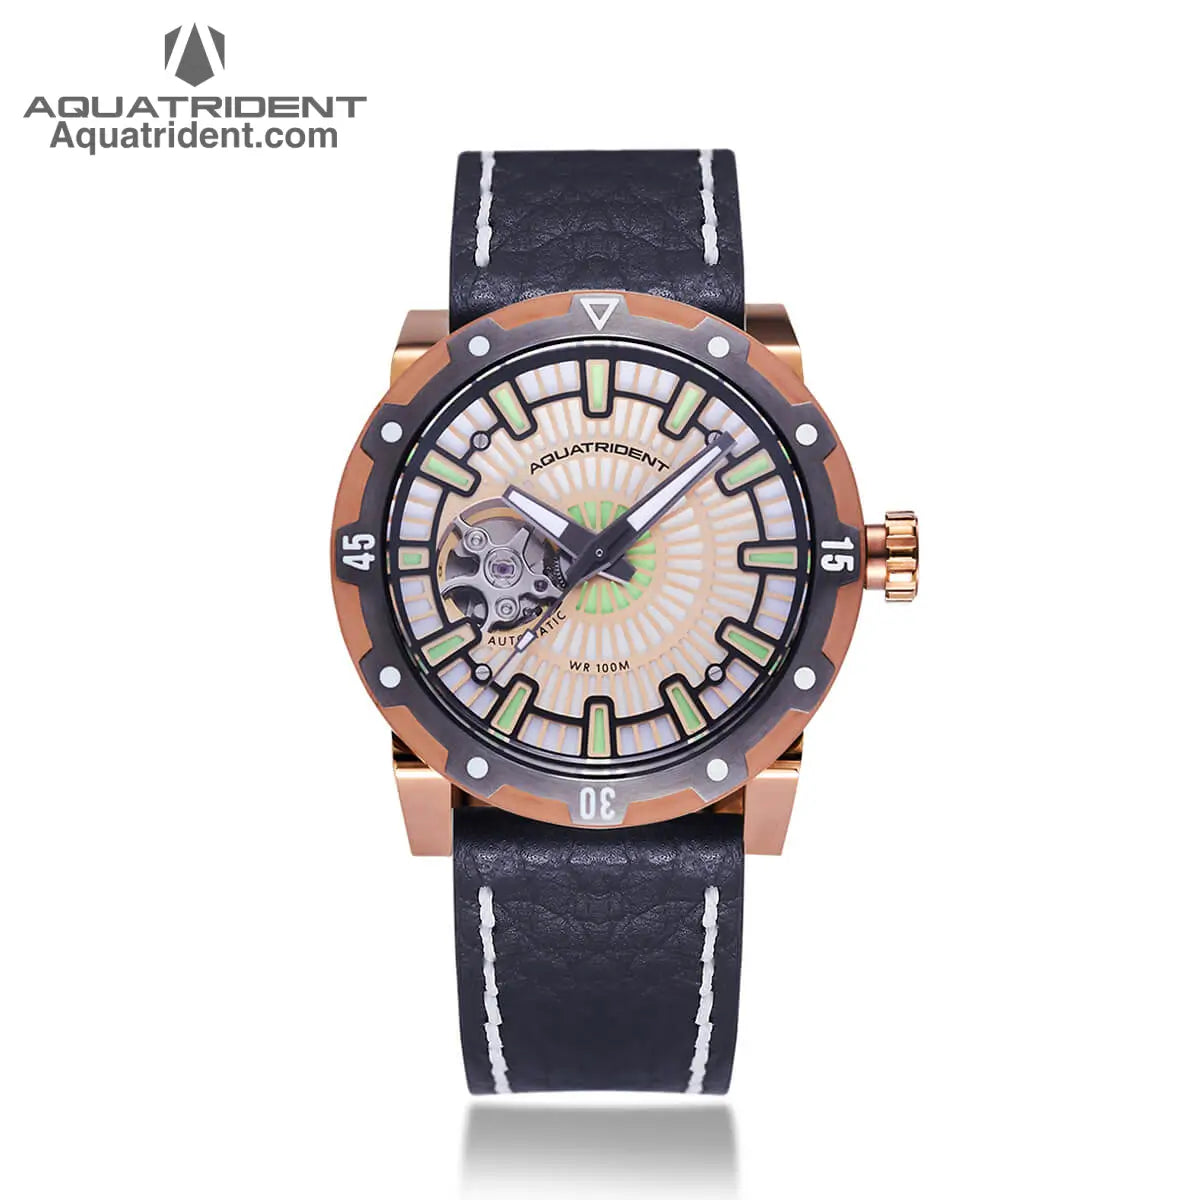 bronze and black steel case- gold reticulated dial-black genuine leather strap-watch